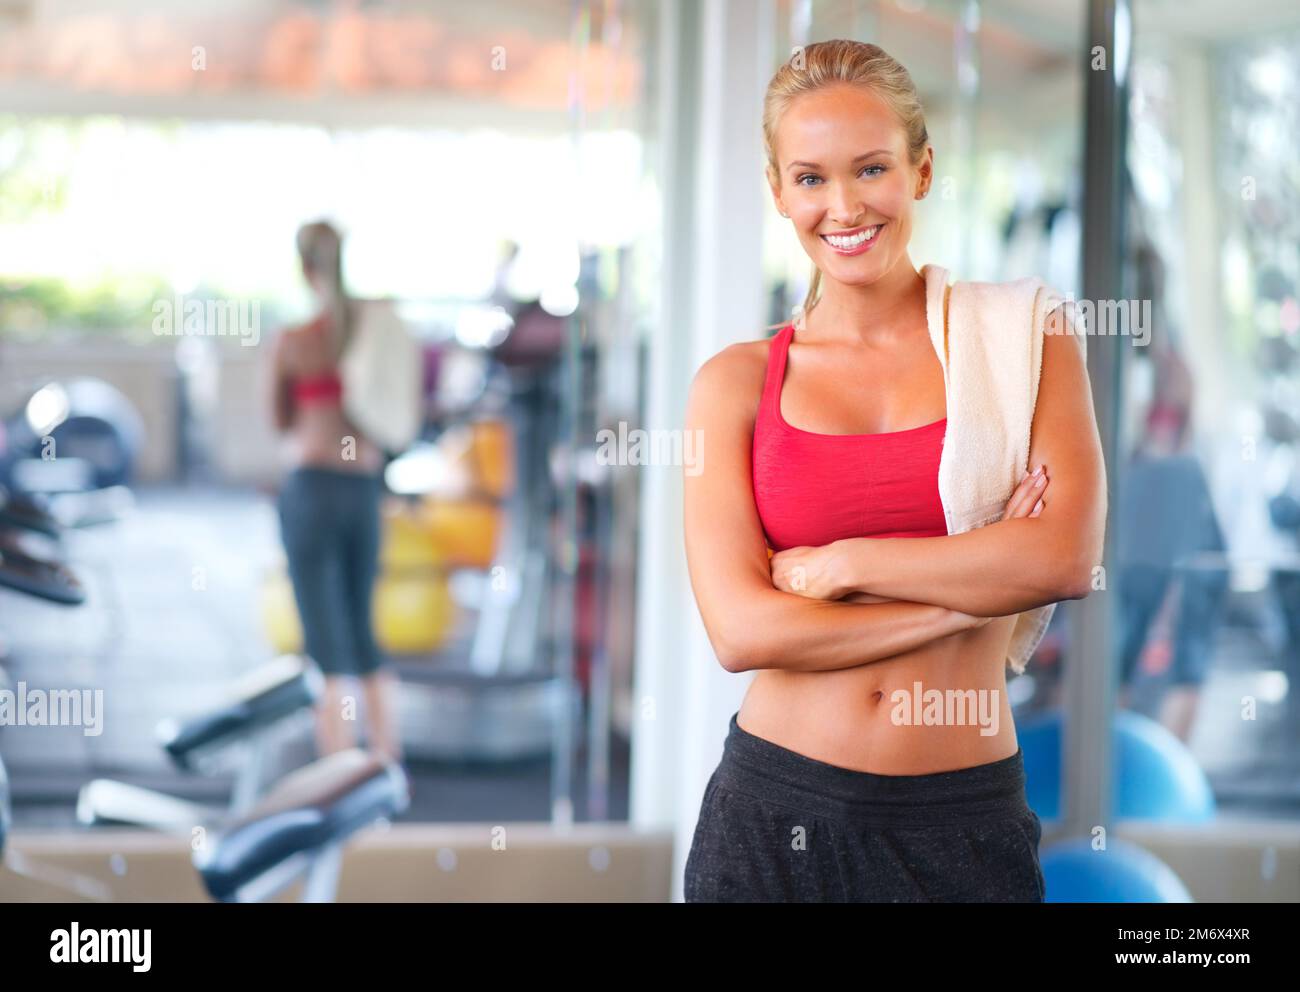 Portrait Of A Beautiful Super Fit Blond Woman. Stock Photo, Picture and  Royalty Free Image. Image 39577944.